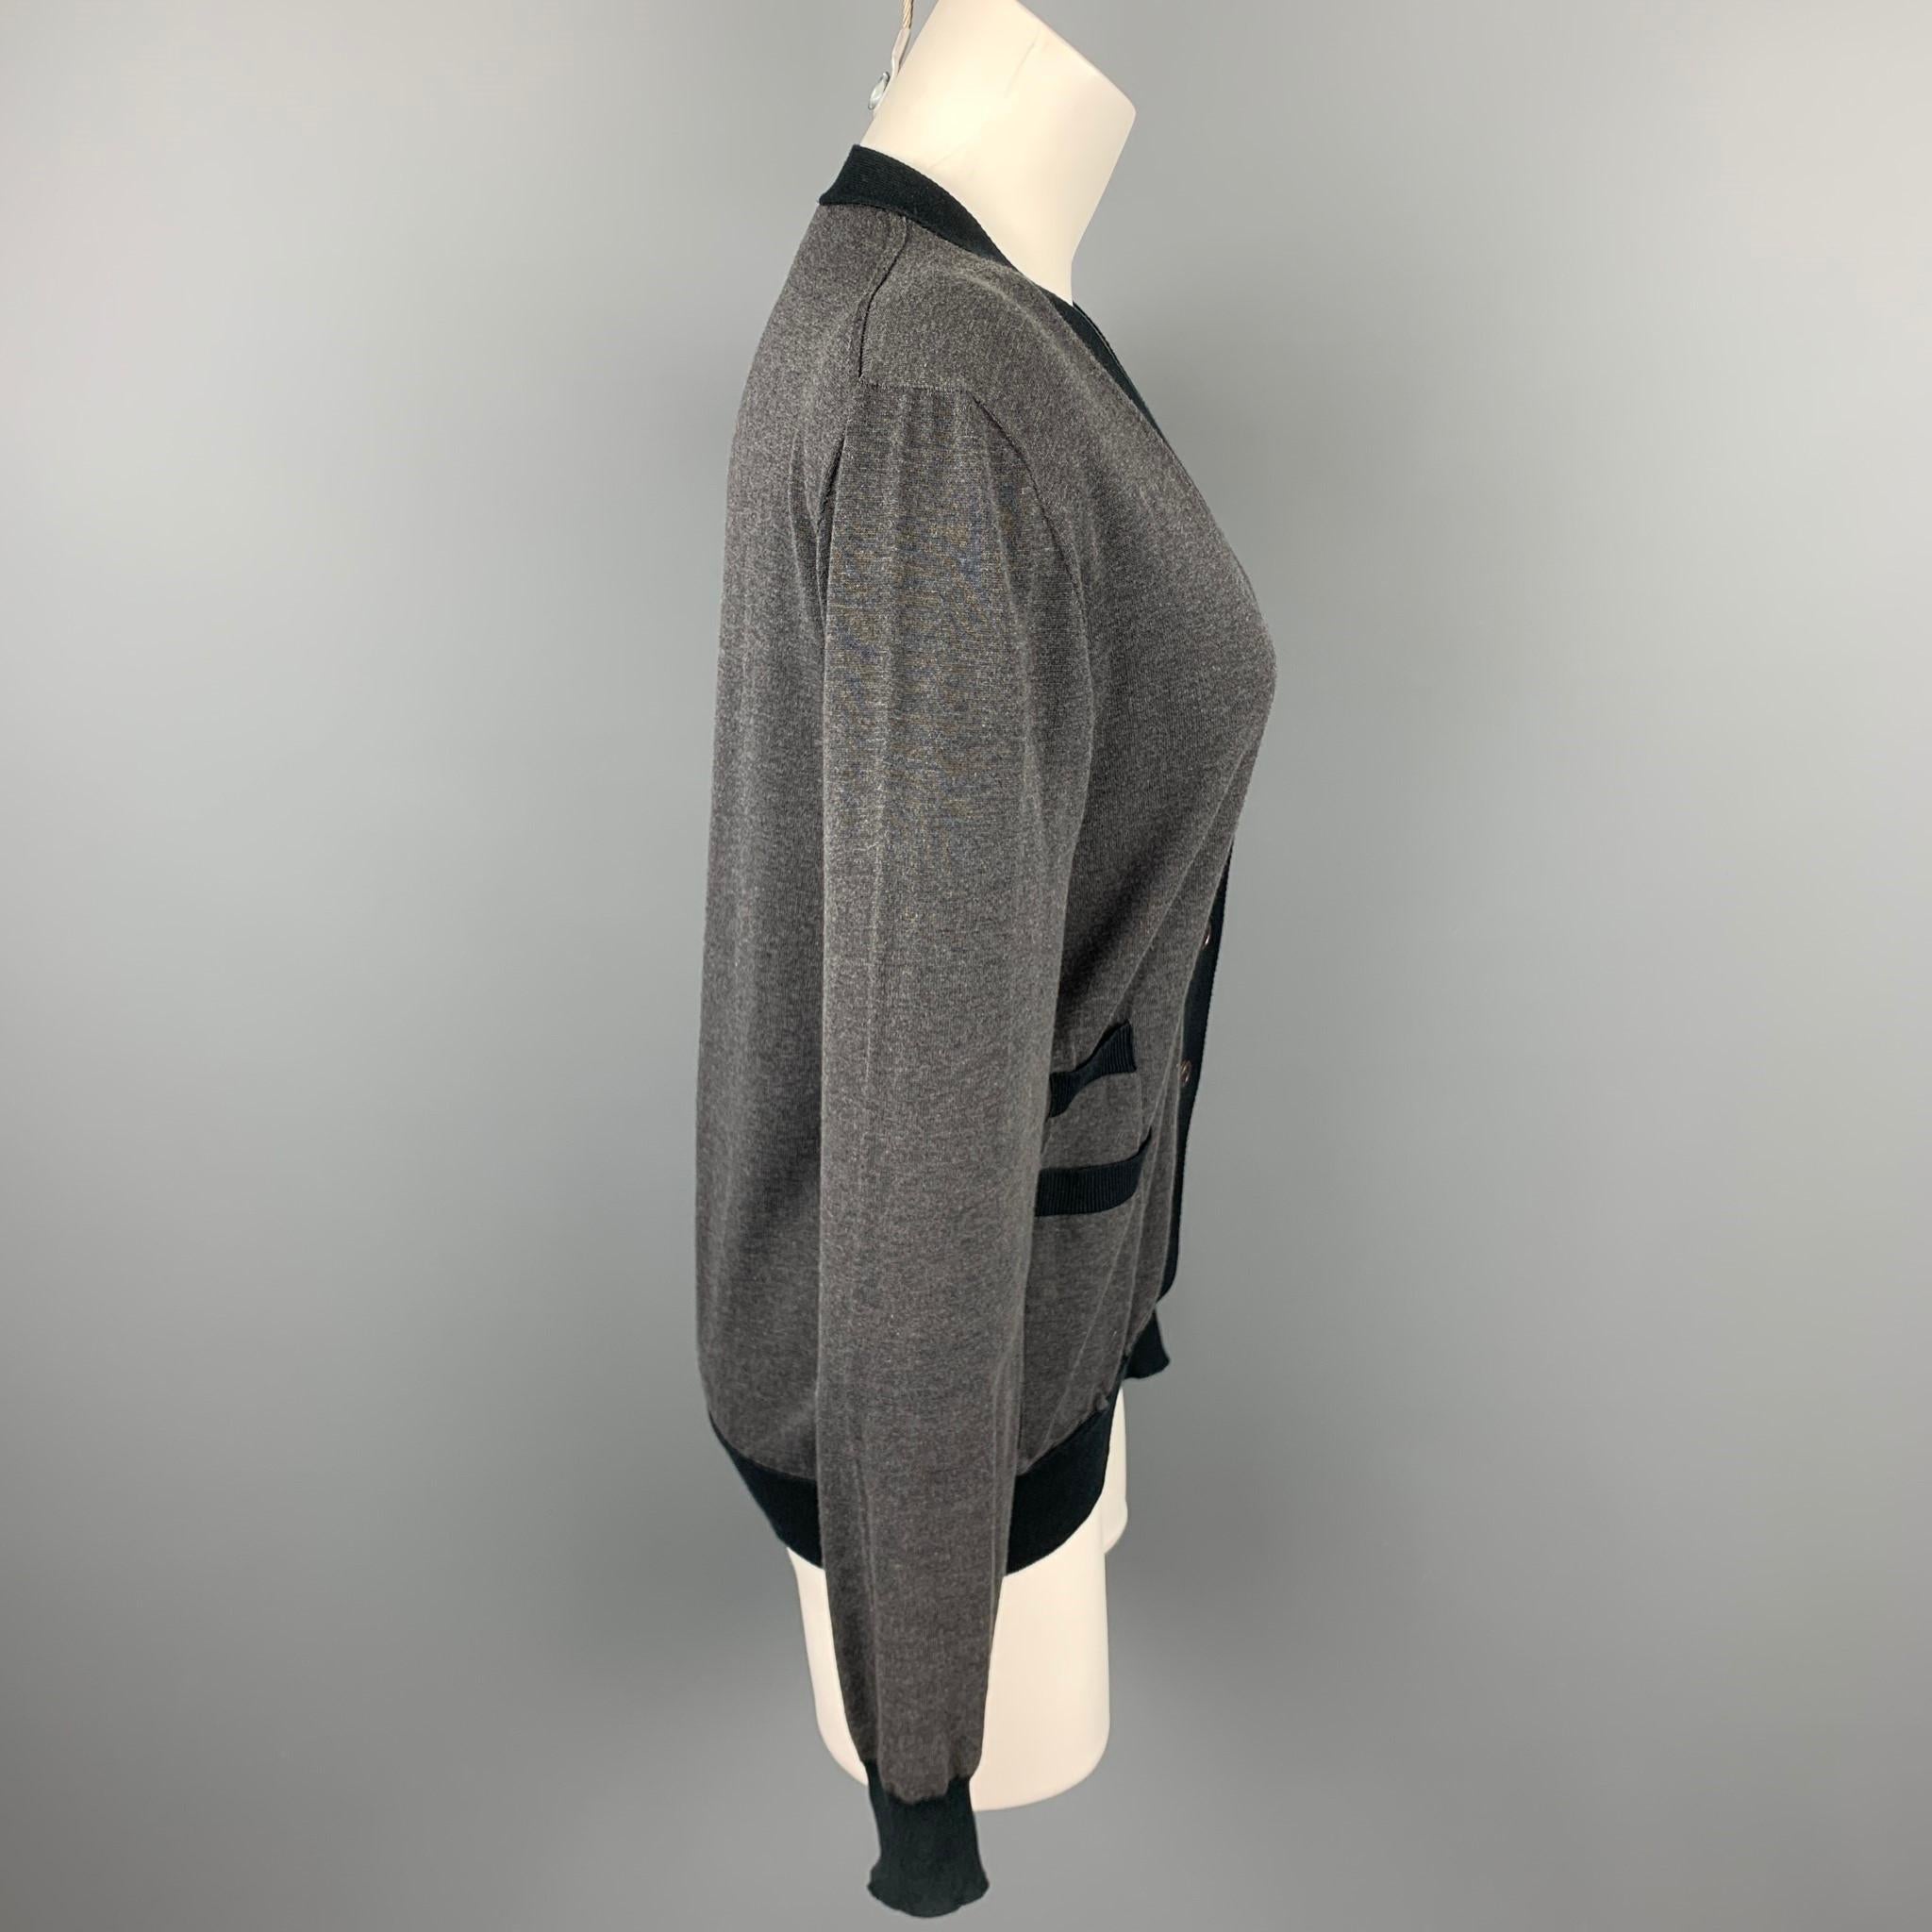 MARNI cardigan comes in a grey jersey cotton with a navy trim featuring a v-neck, front pockets, and a buttoned closure. Made in Spain.

Good Pre-Owned Condition.
Marked: 42

Measurements:

Shoulder: 17 in. 
Bust: 38 in. 
Sleeve: 27 in. 
Length: